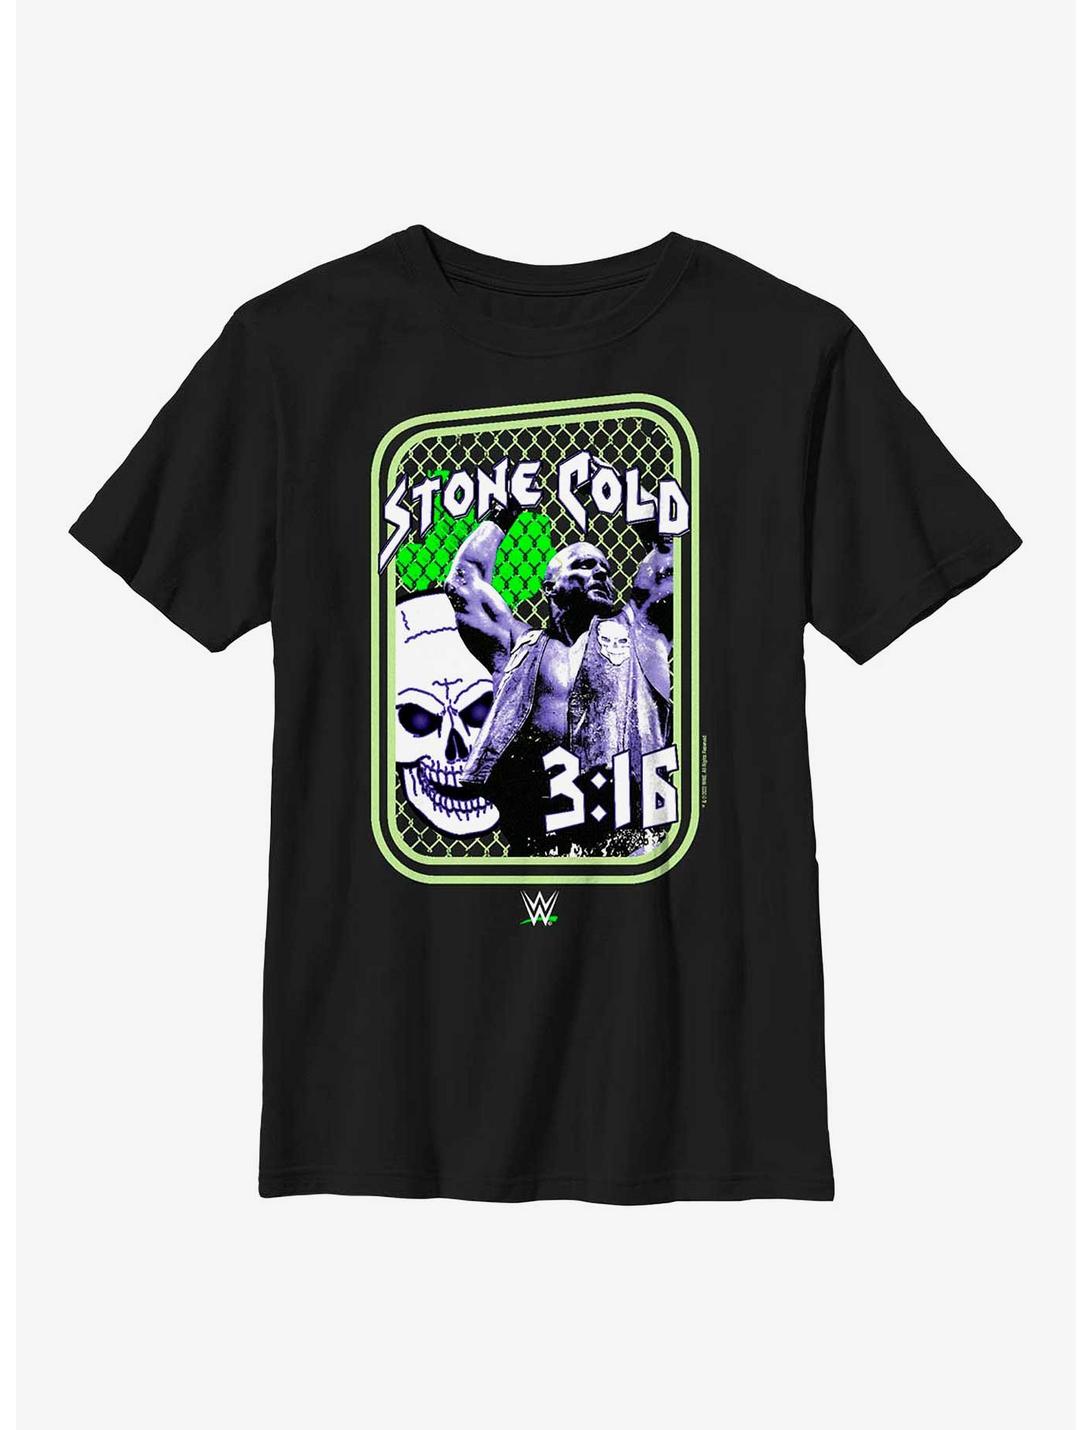 WWE Stone Cold Steve Austin Steel Cage Youth T-Shirt, BLACK, hi-res